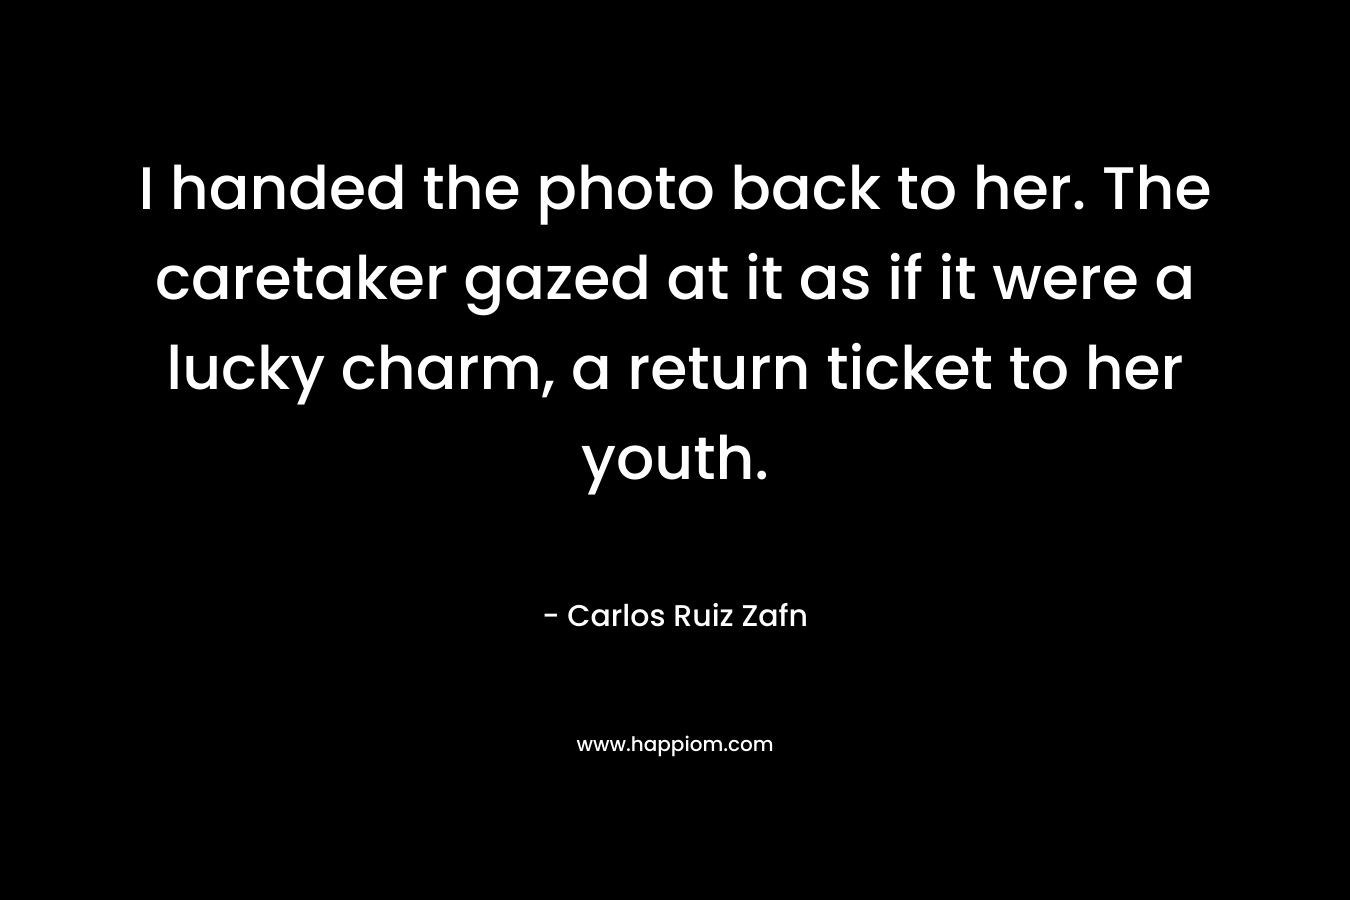 I handed the photo back to her. The caretaker gazed at it as if it were a lucky charm, a return ticket to her youth. – Carlos Ruiz Zafn